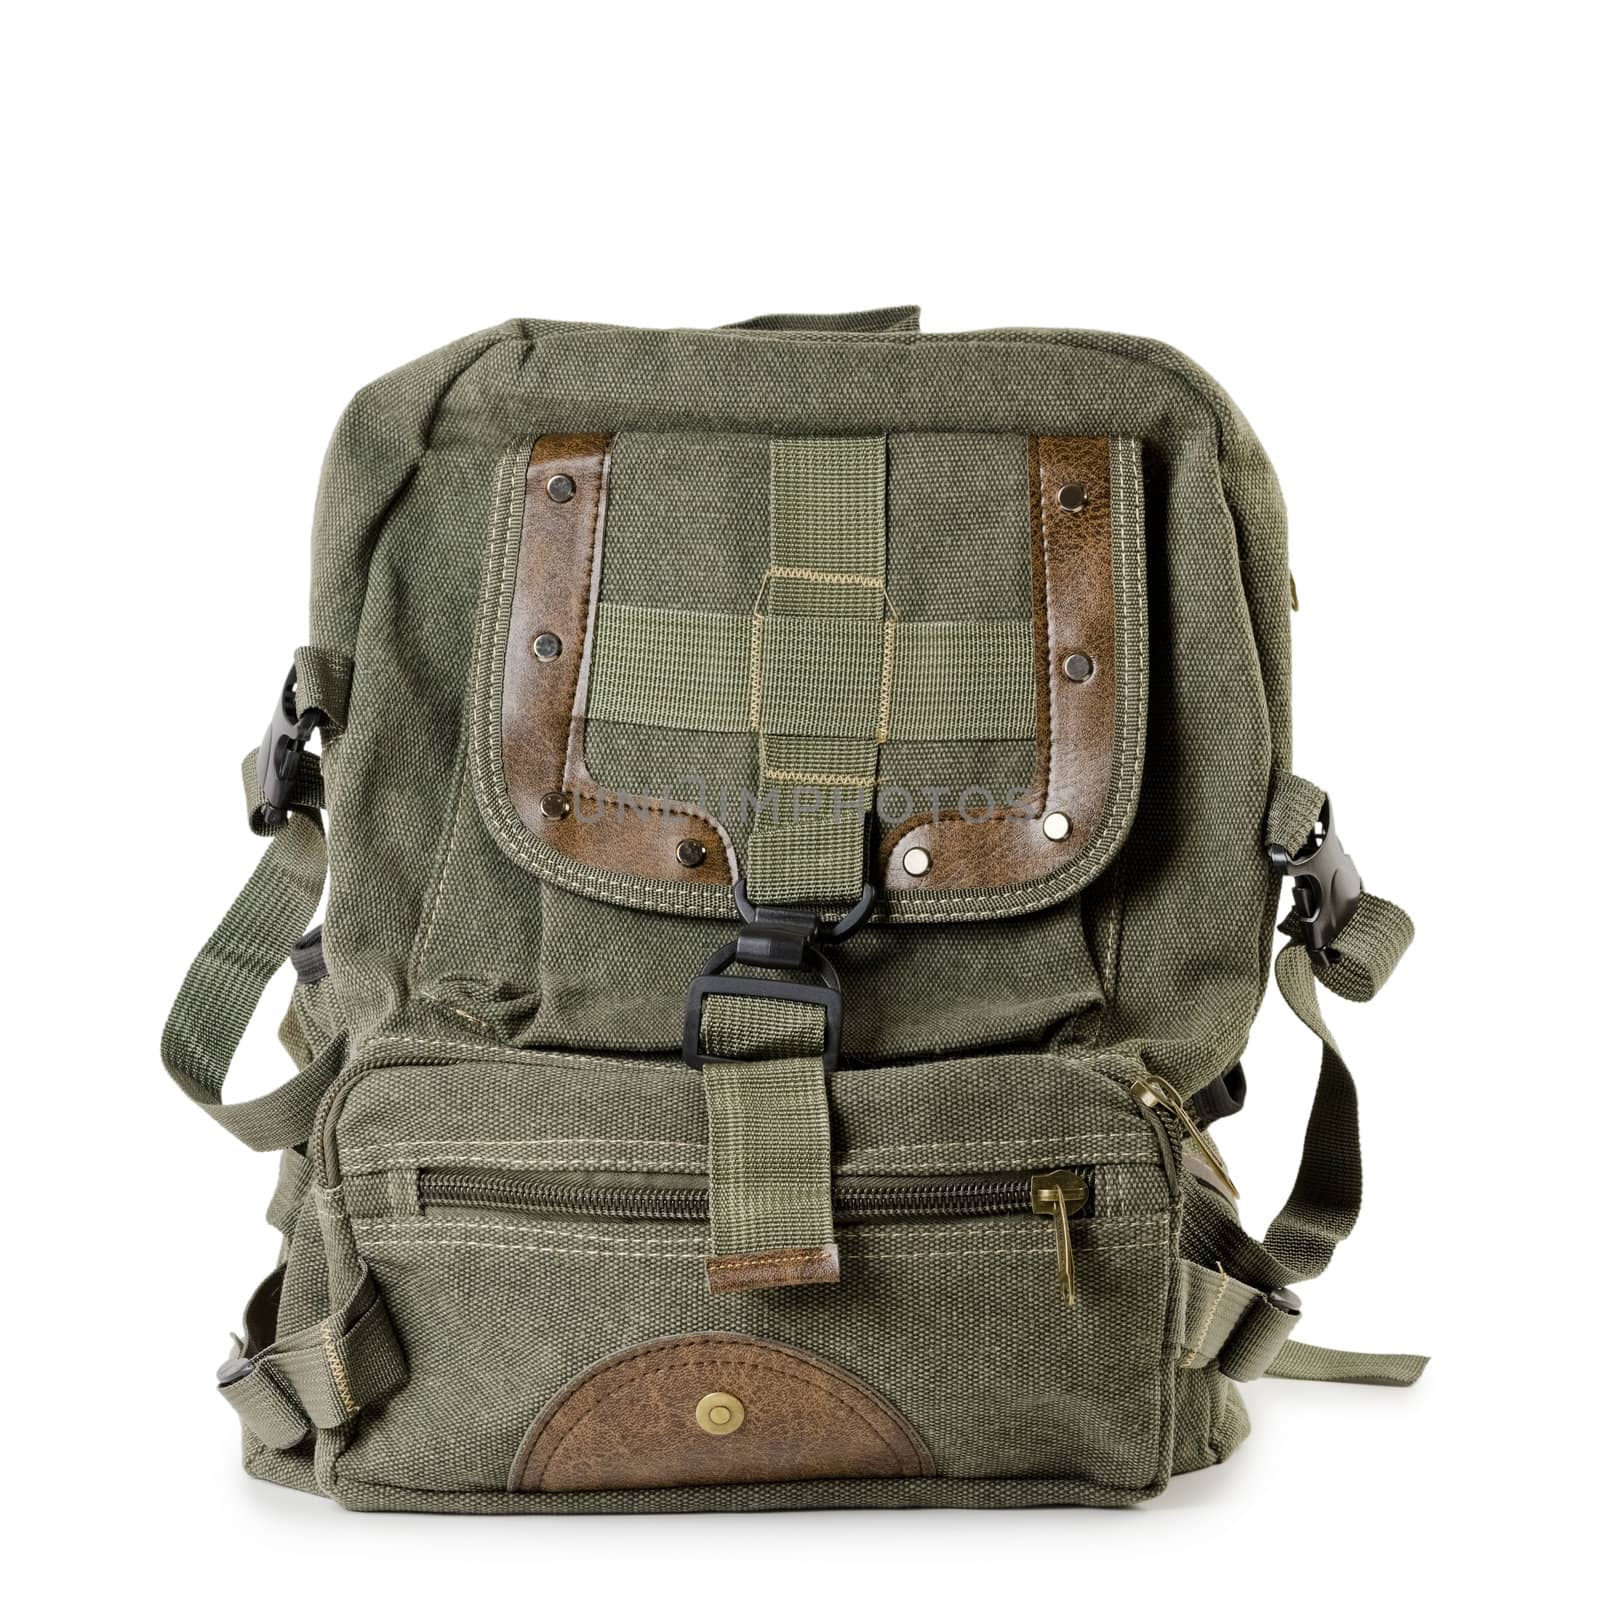 Old tarpaulin backpack over the white background